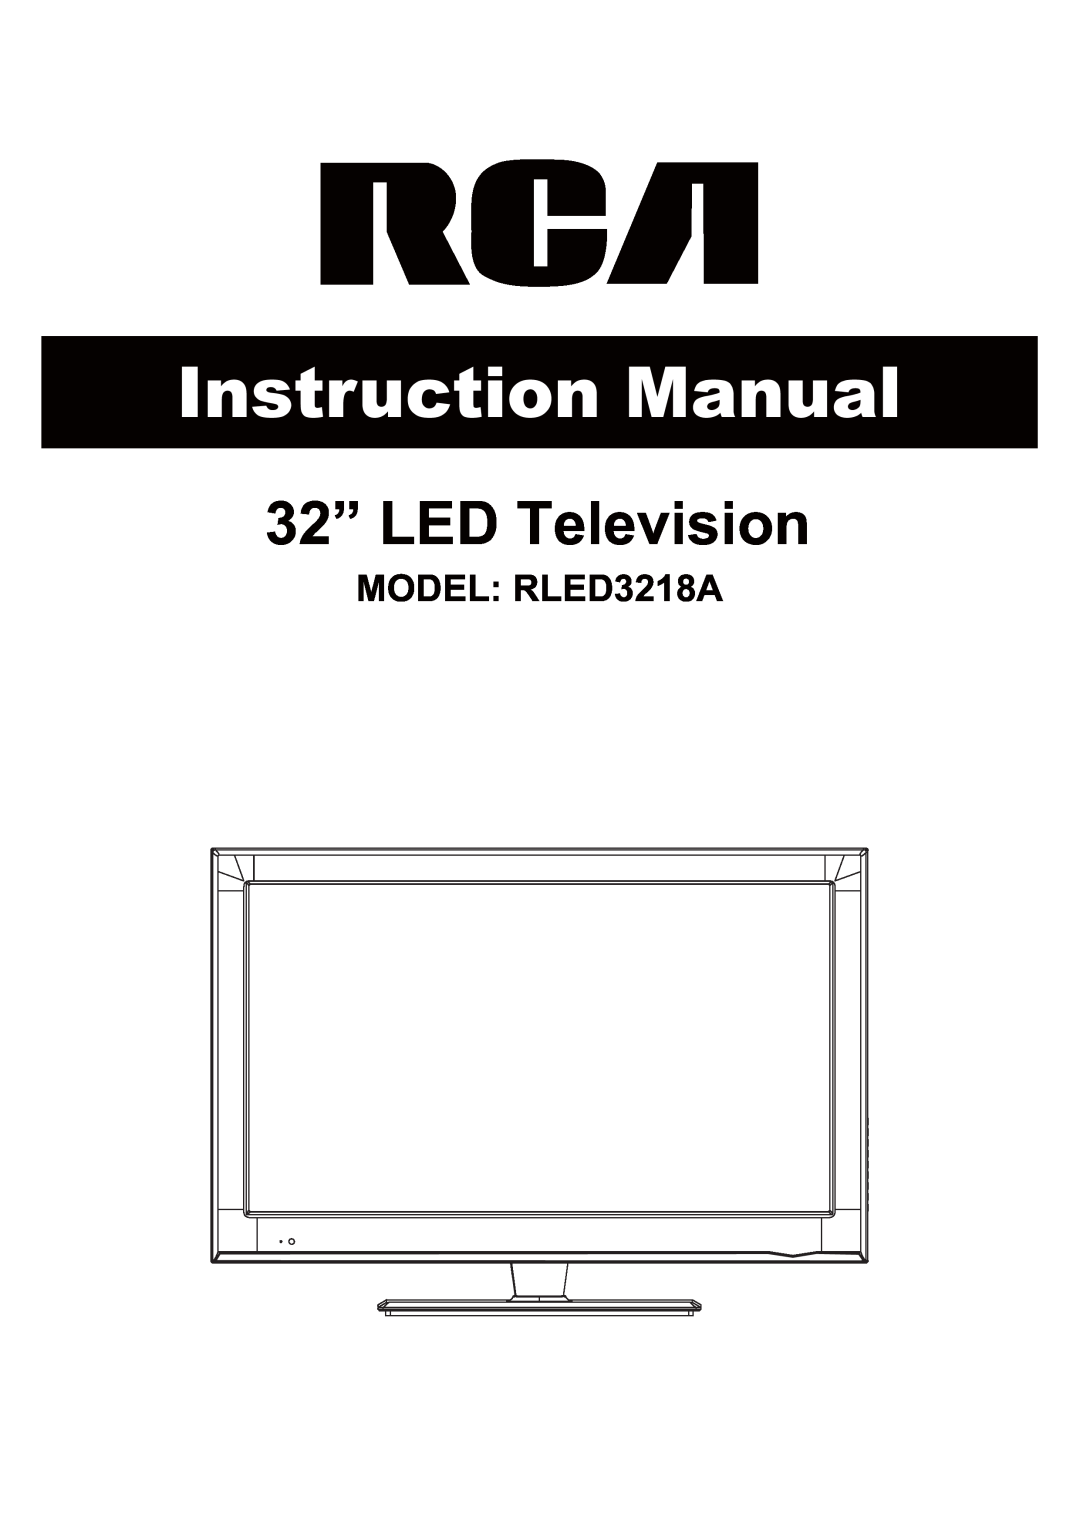 Curtis manual 32” LED Television, MODEL RLED3218A 